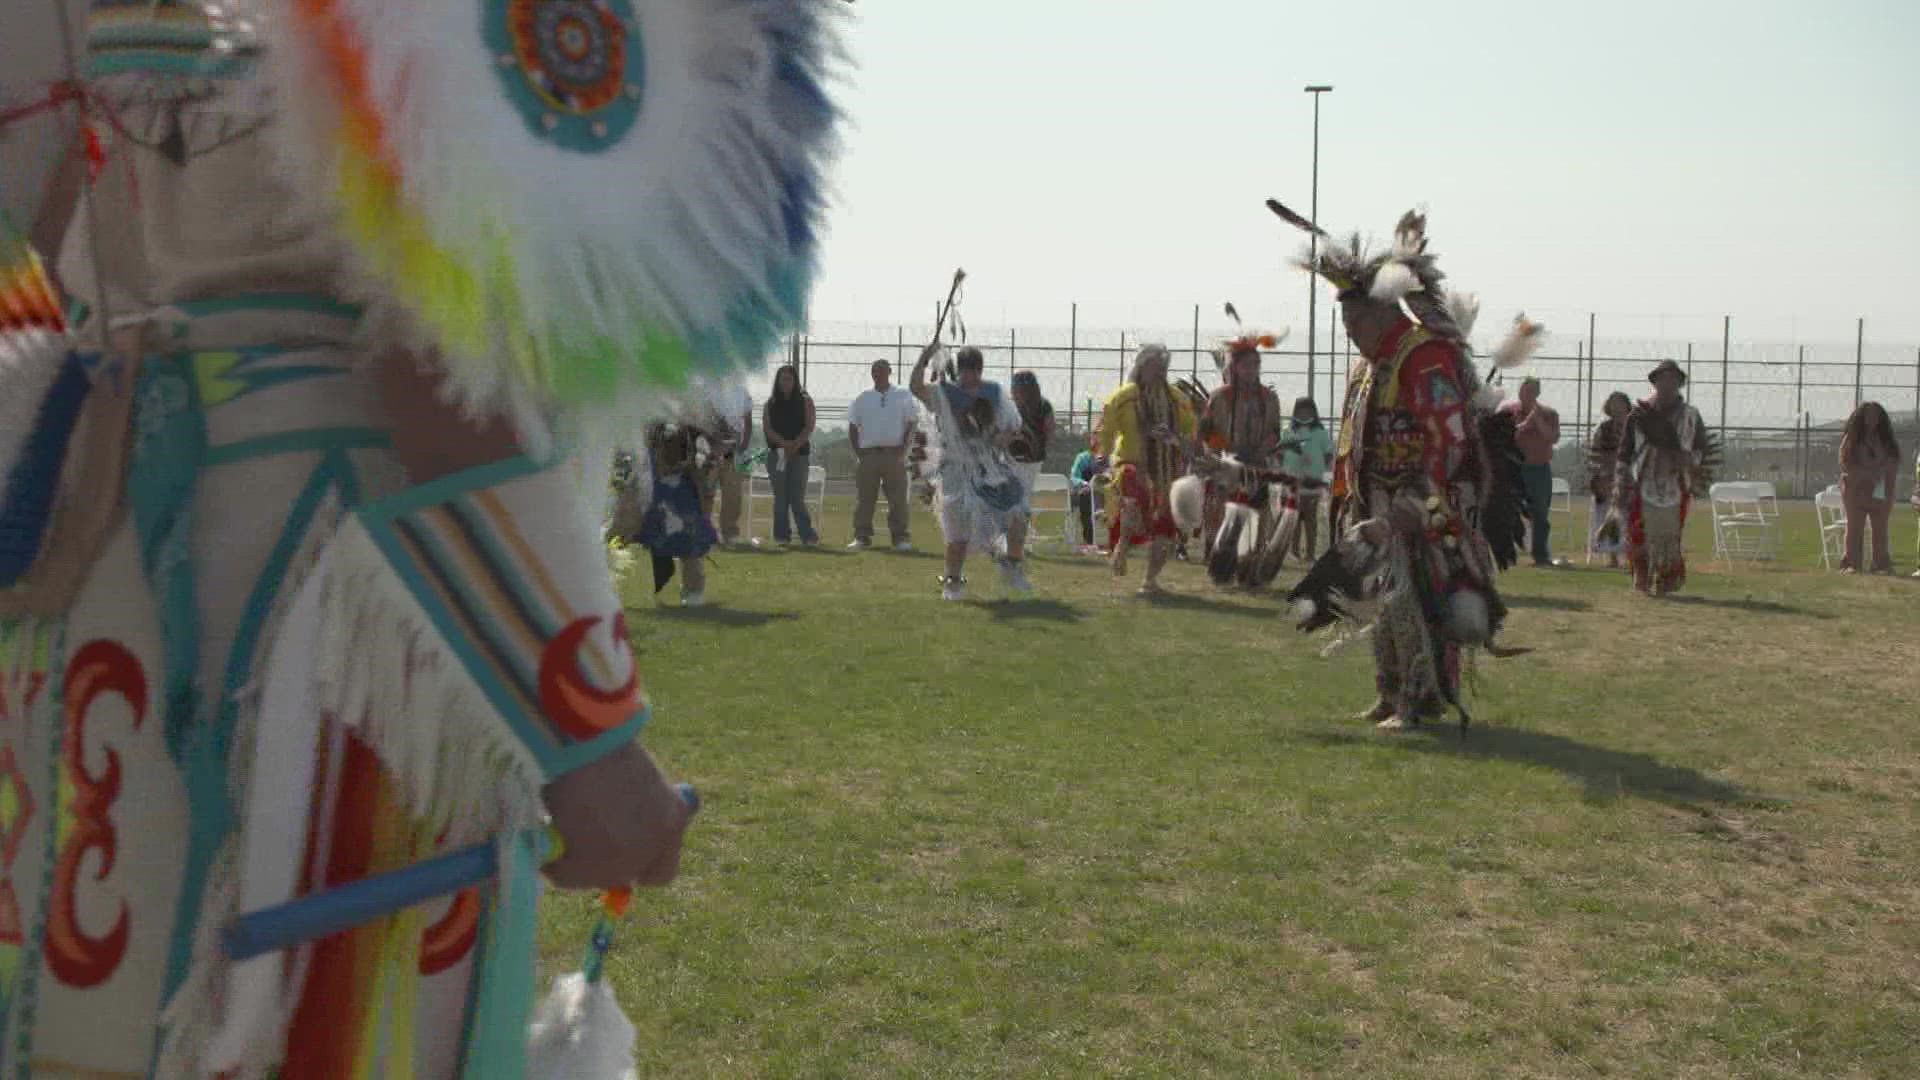 For the first time in nearly three years, inmates of the Washington State Prison in Walla Walla held a traditional Native American weightlifting ceremony.